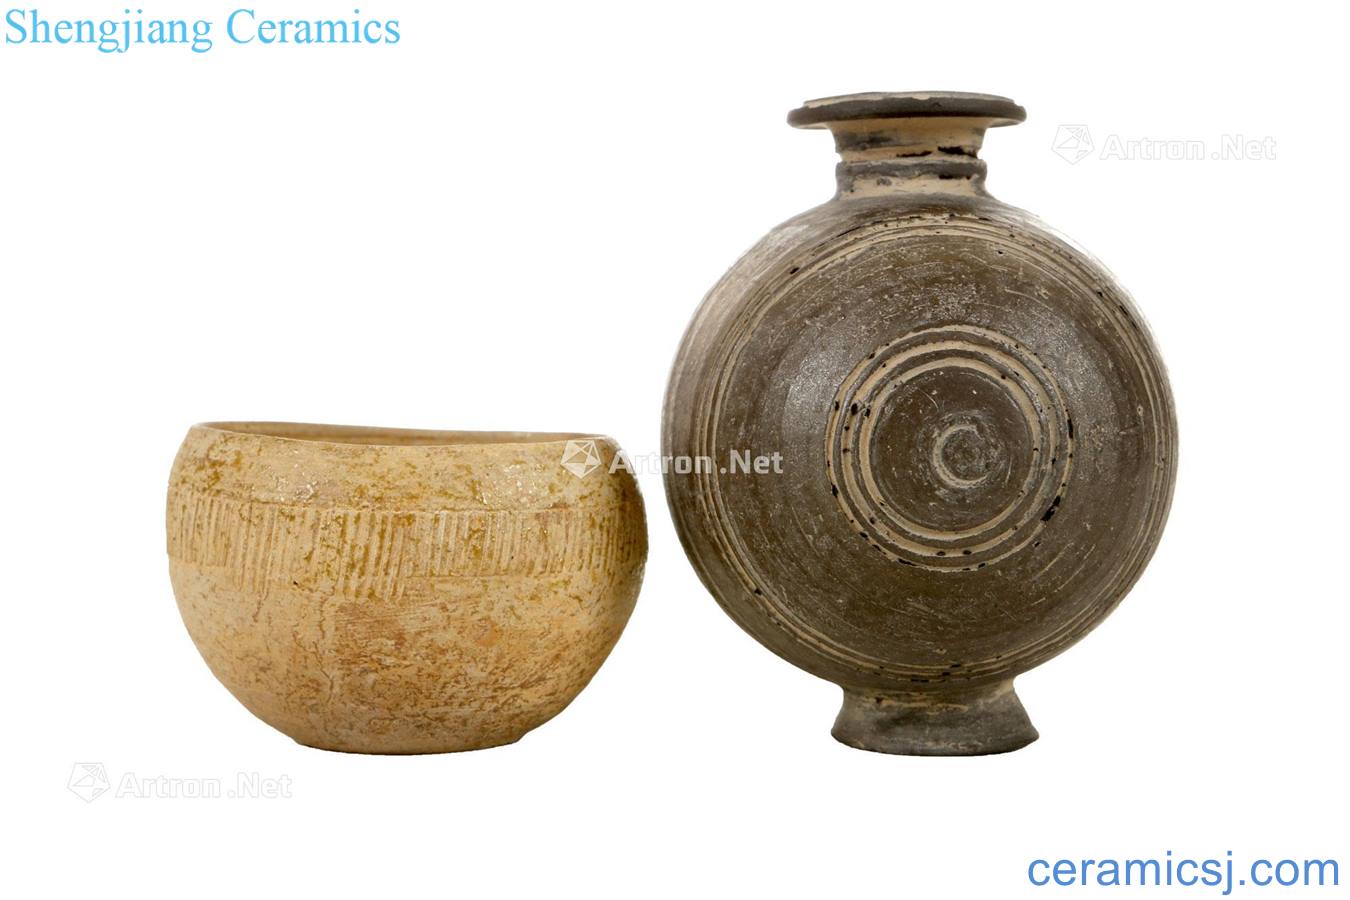 Dynasty, the western han dynasty pottery bowl and black pottery pitcher